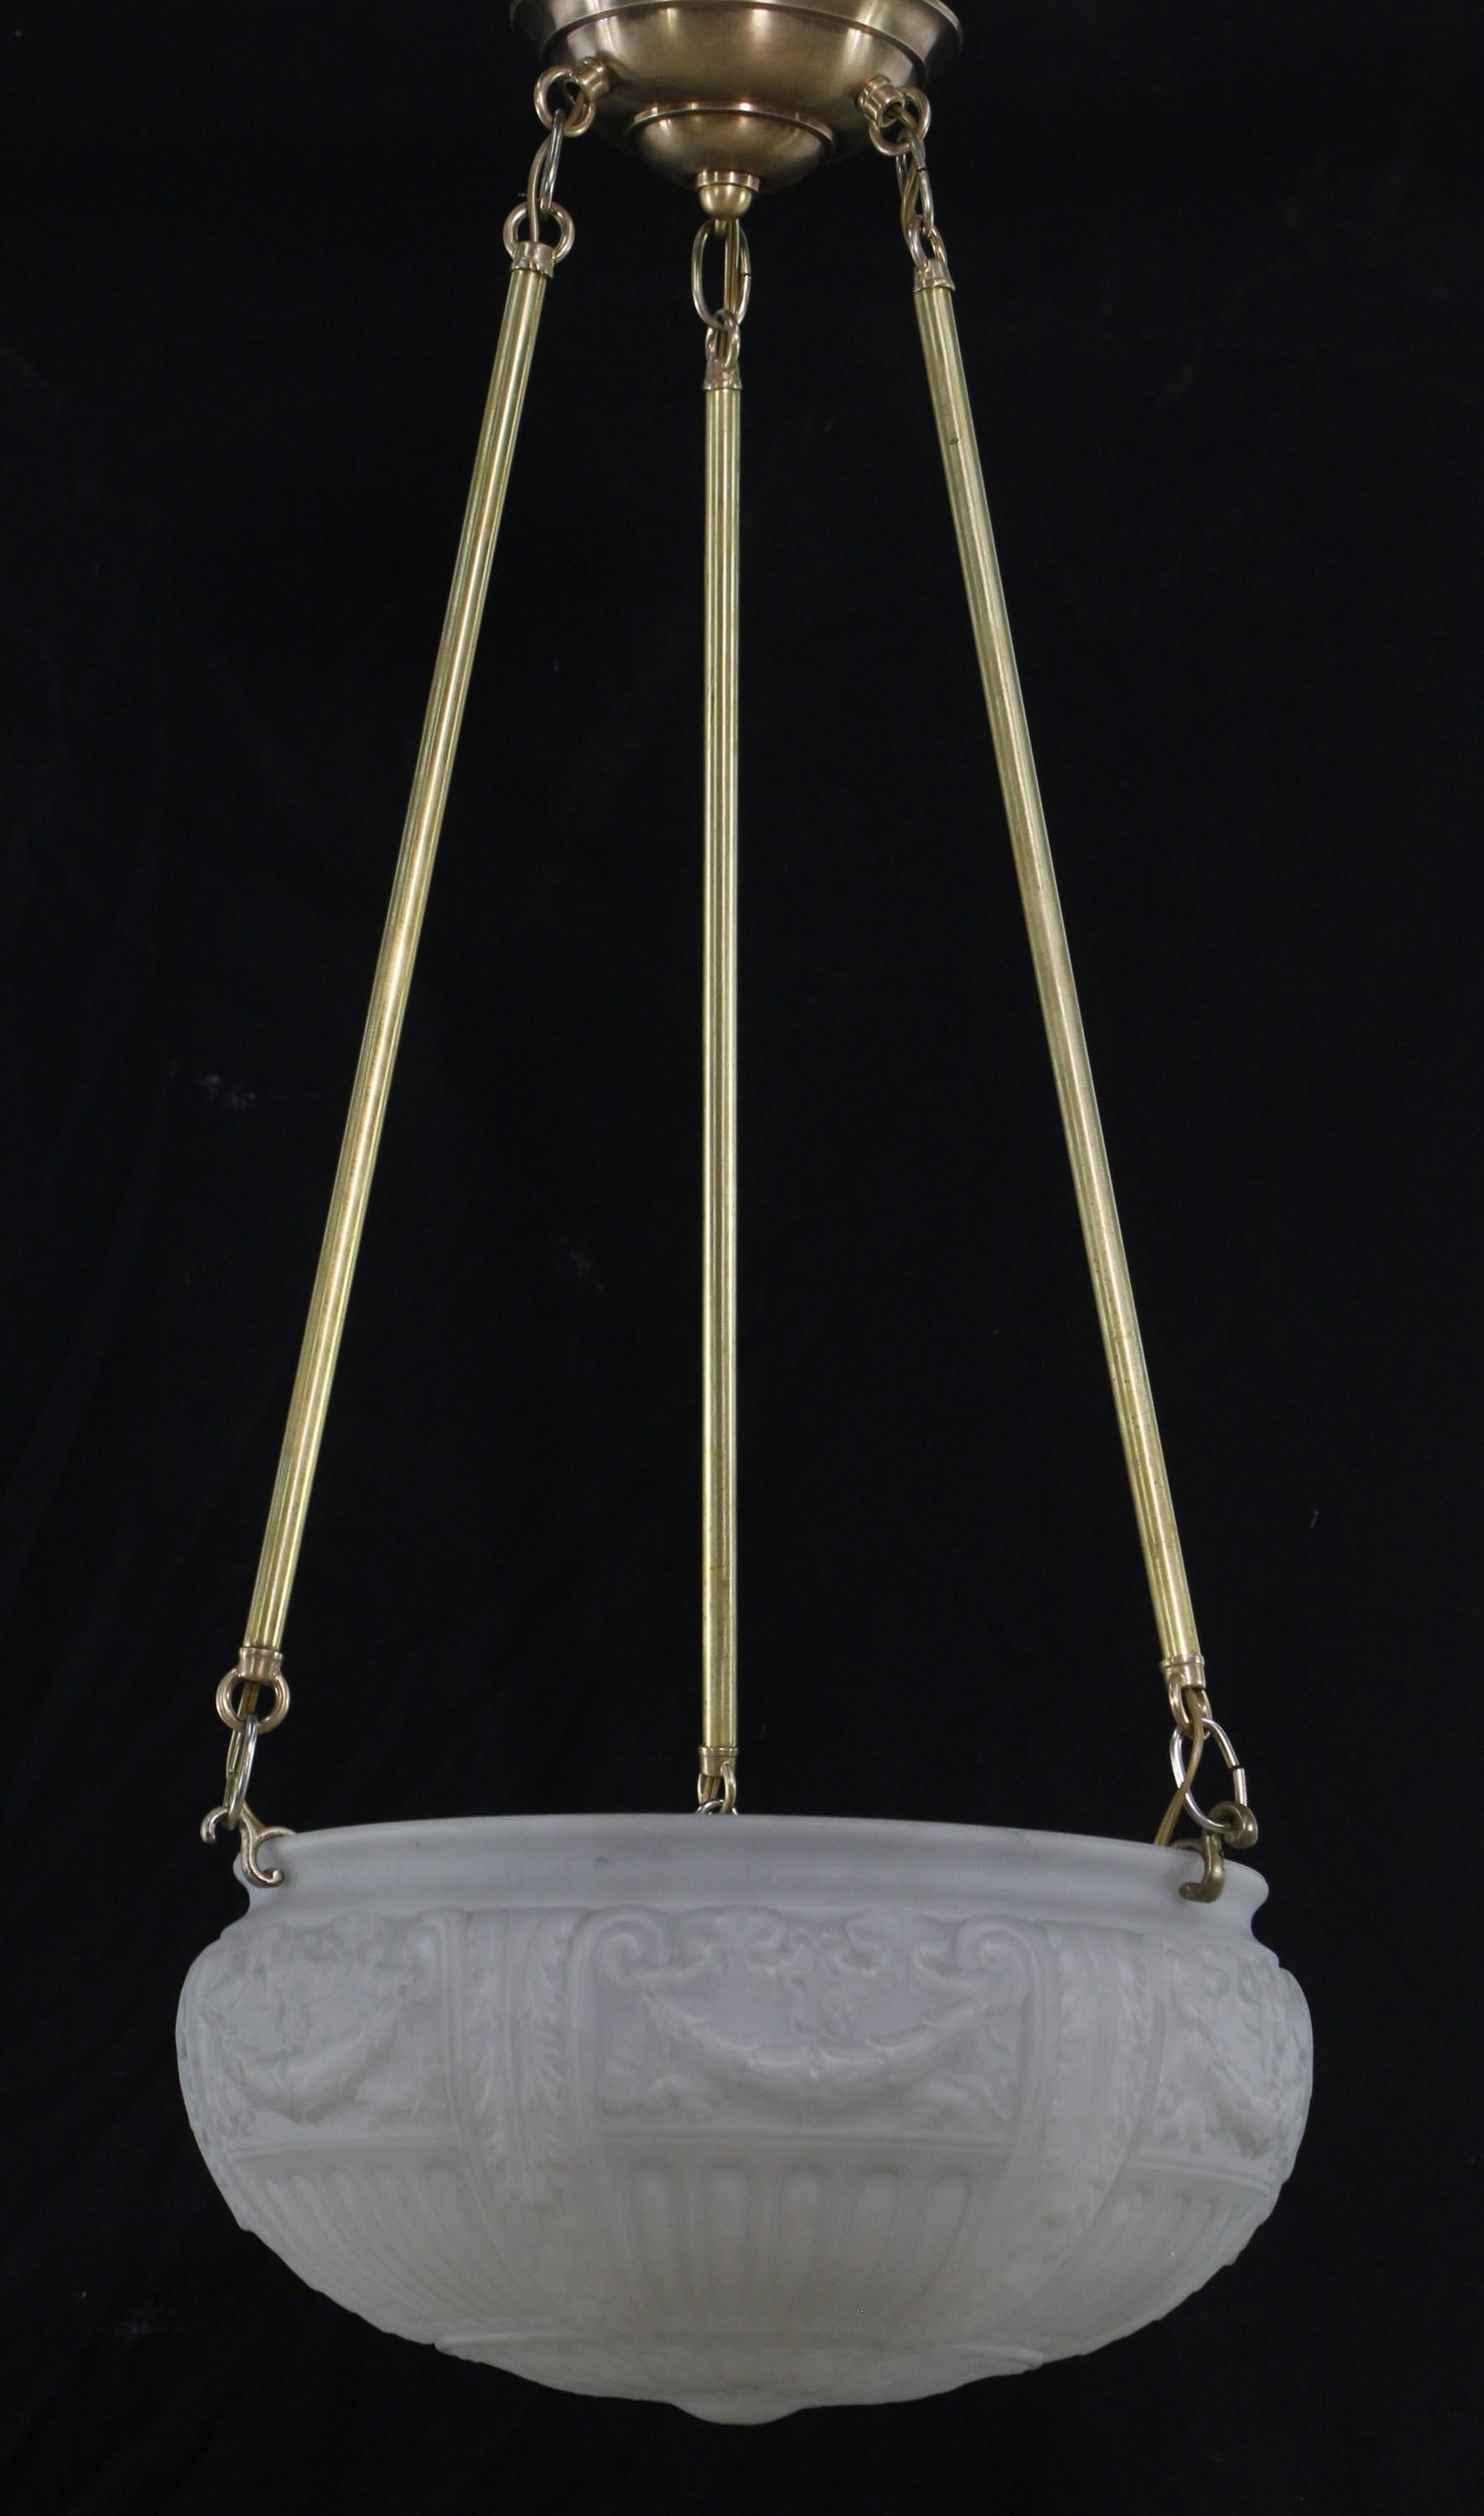 White cast glass dish pendant light with ornate swag and foliate details suspended from three brass poles with a brass canopy. Cleaned and restored. Takes three medium base lightbulbs. Please note, this item is located in our Scranton, PA location.